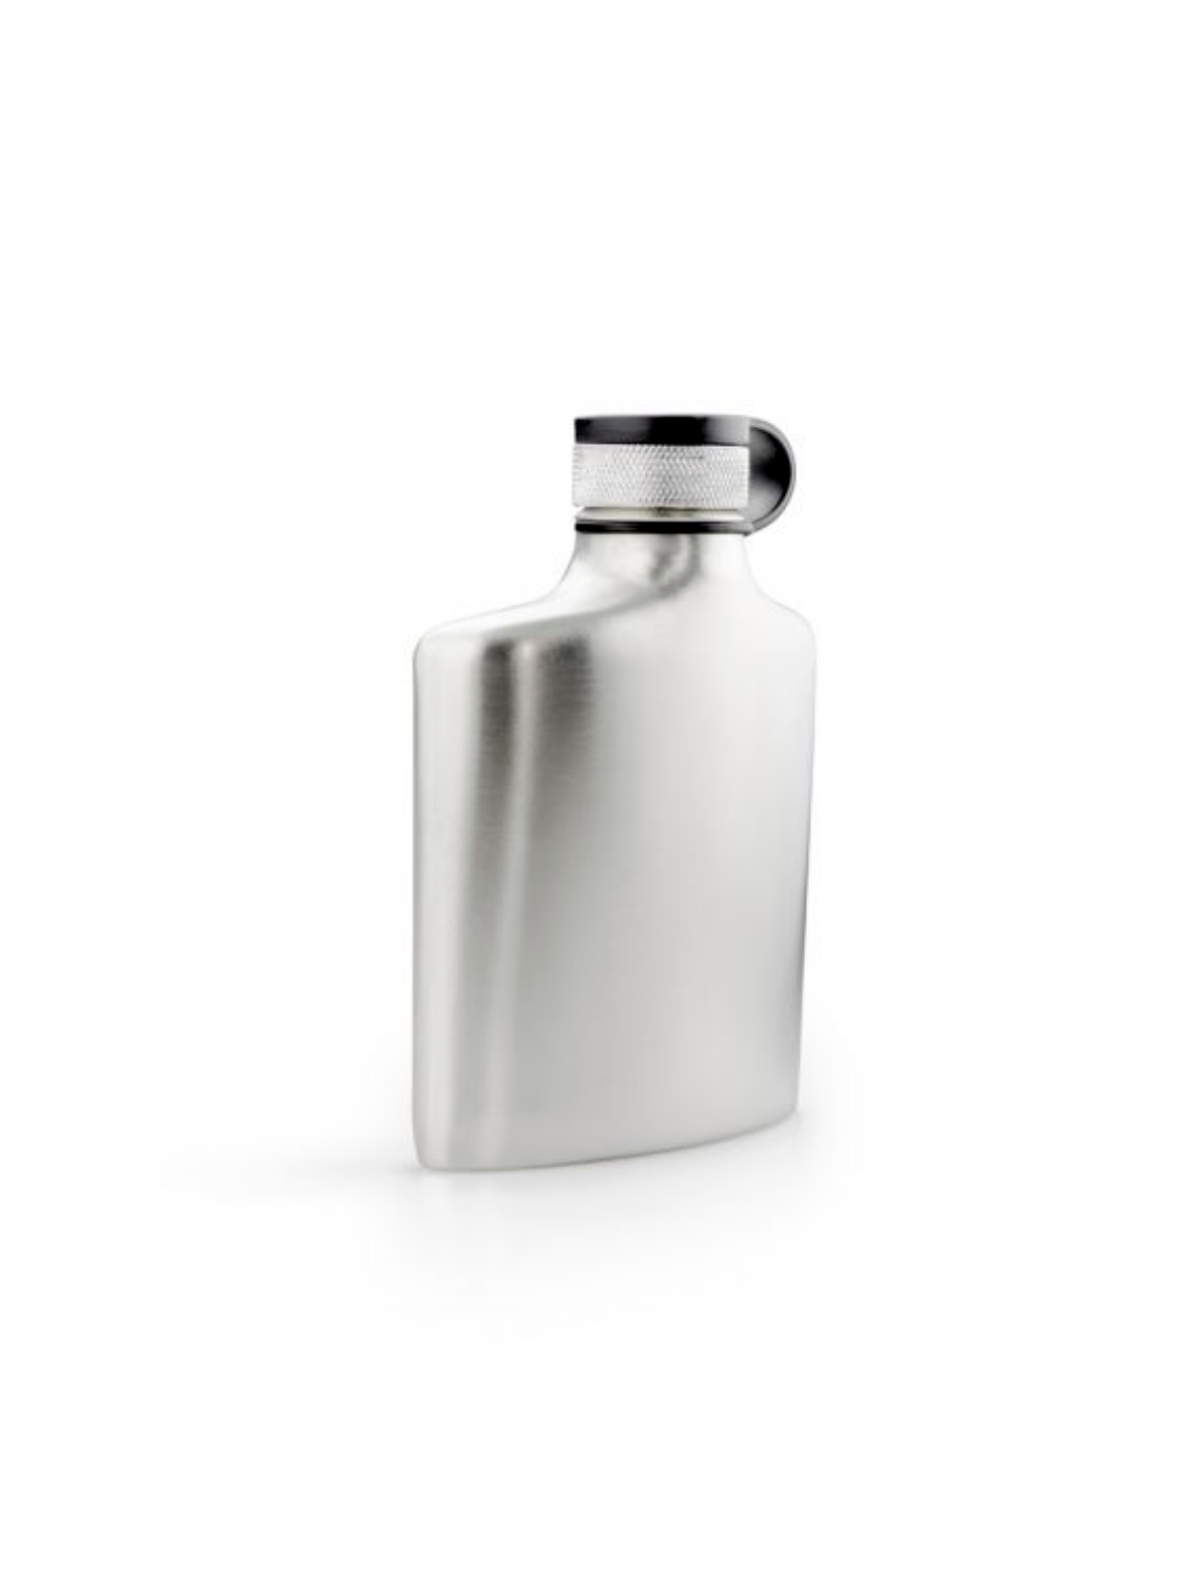 [GSI Outdoors] GLACIER STAINLESS 8oz HIP FLASK